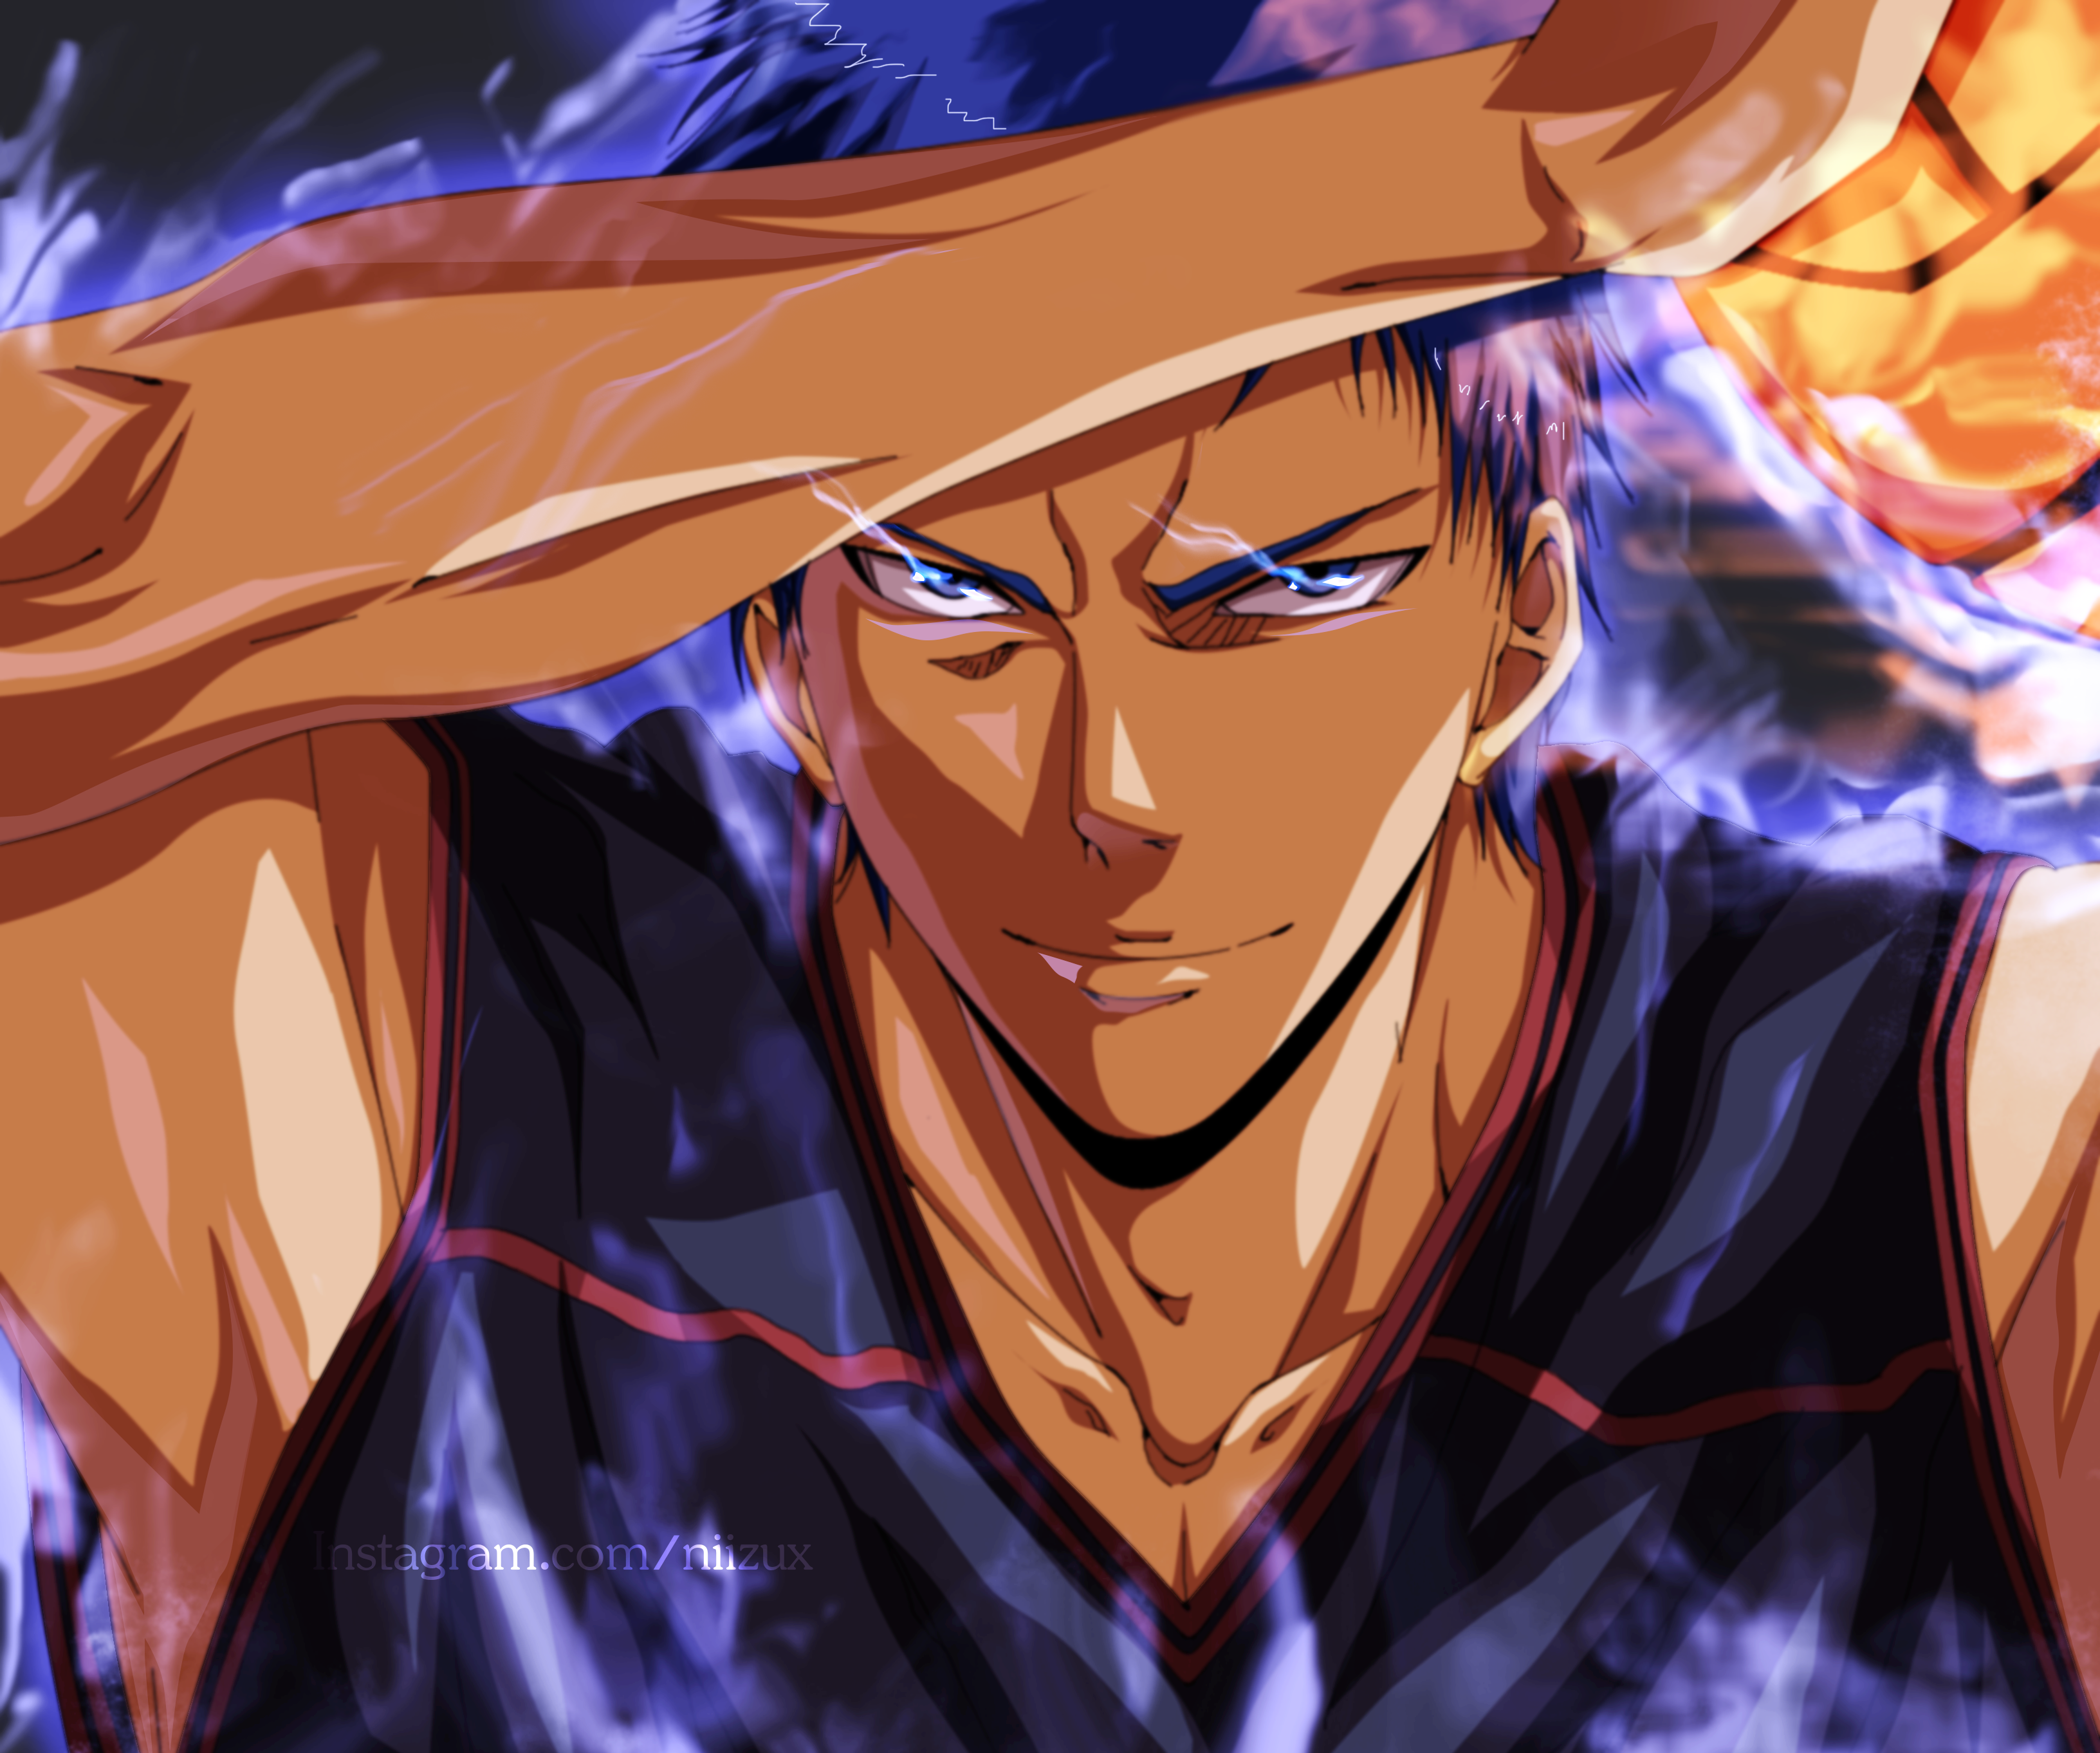 2069x1598 / 2069x1598 Daiki Aomine wallpaper - Coolwallpapers.me!